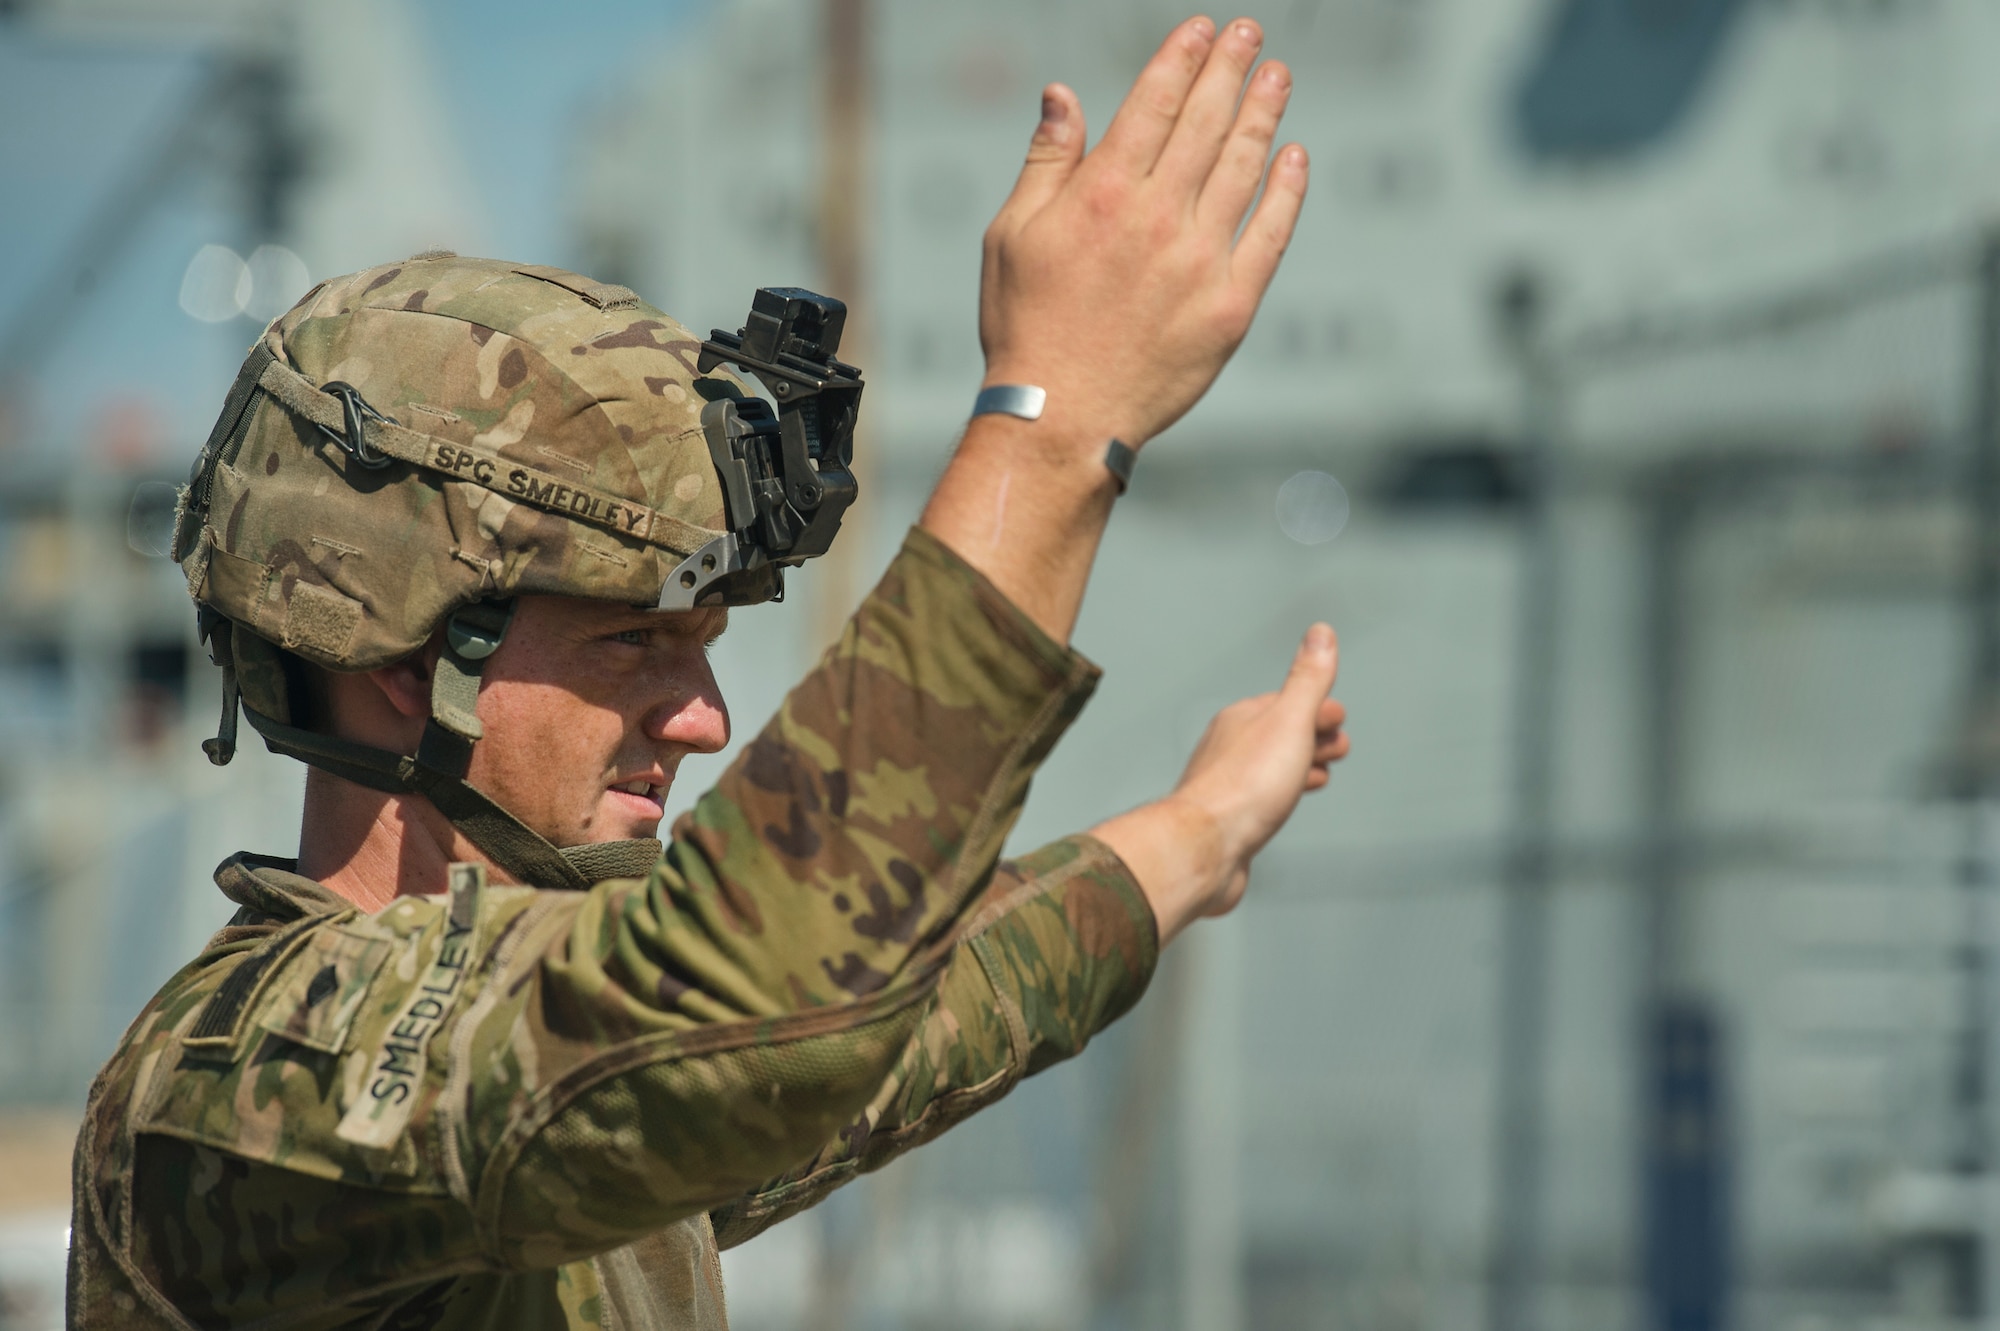 U.S. Army Spc. Robert Smedley, assigned to the 18th Field Artillery Brigade, 188th Brigade Support Battalion from Fort Bragg, N.C., directs military vehicles off Logistics Naval Vessel Cape Decision during Exercise Dragon Lifeline Aug. 7, 2019, at the Federal Law enforcement Training Center, S.C. The exercise provided military personnel with experience needed to support rapid deployment operations across air, land, rail and sea. JB Charleston helps to provide rapid global deployment of personnel and equipment is a capability that Joint Base Charleston helps to provide. The annual exercise is just one of the critical readiness exercises the DOD conducts to maintain a lethal and ready force. (U.S. Air Force photo by Tech. Sgt. Christopher Hubenthal)